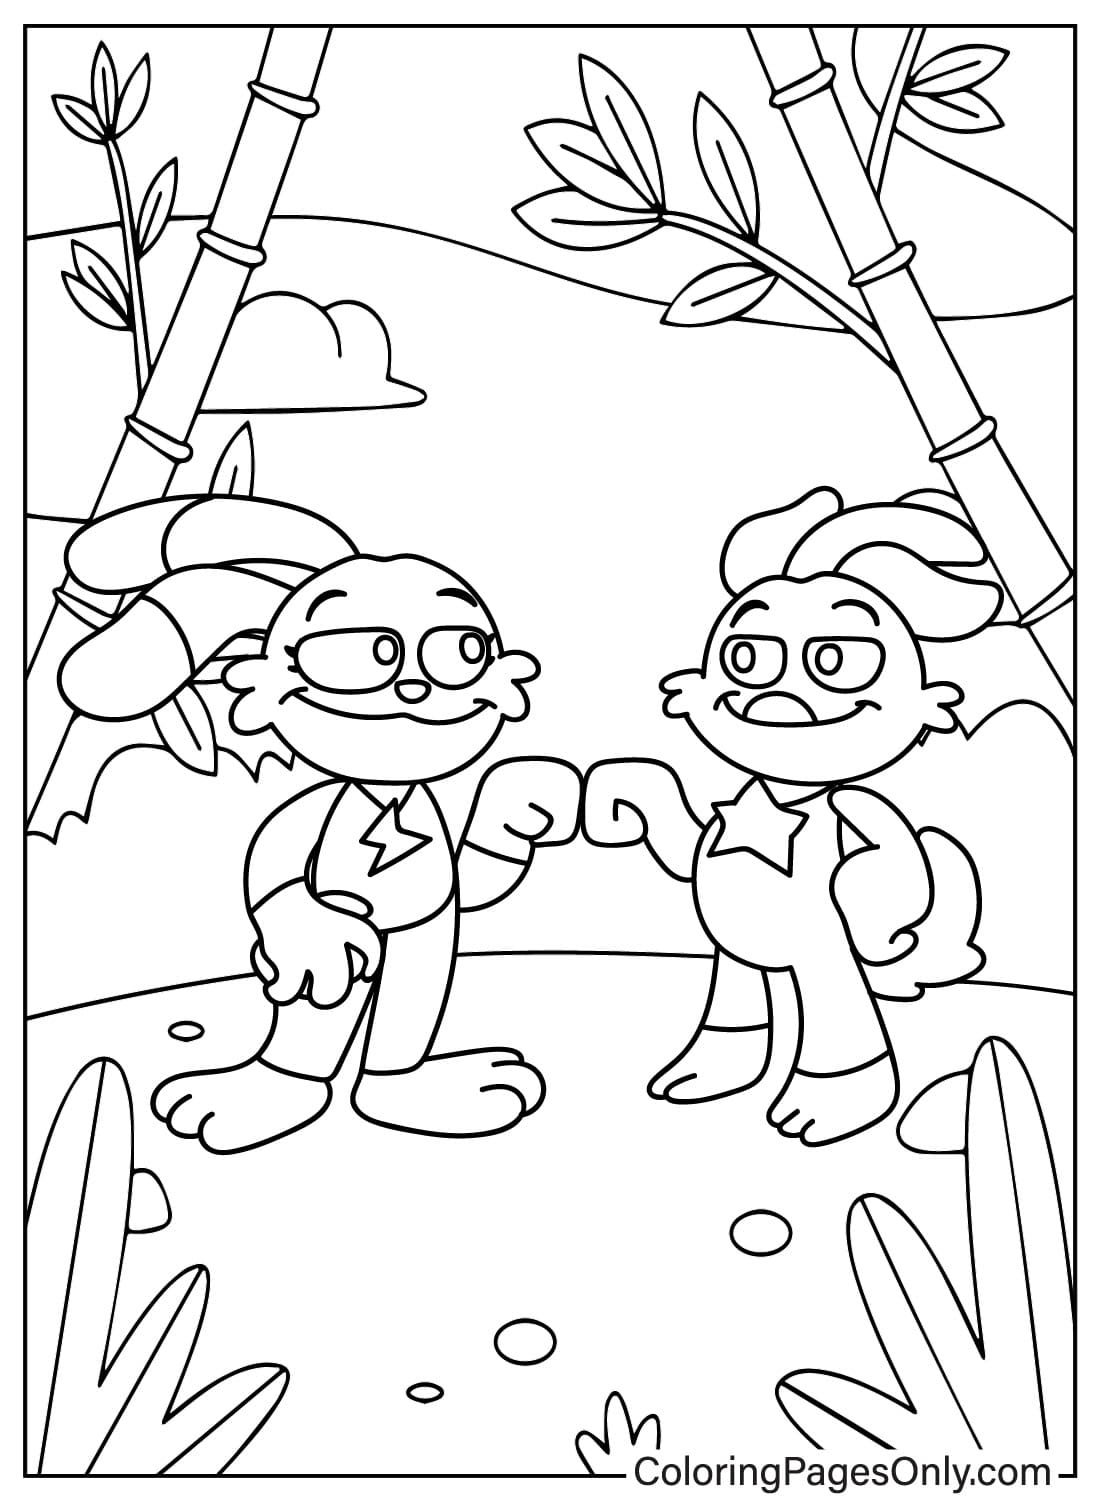 KickinChicken and Hoppy Hopscotch Coloring Page from KickinChicken